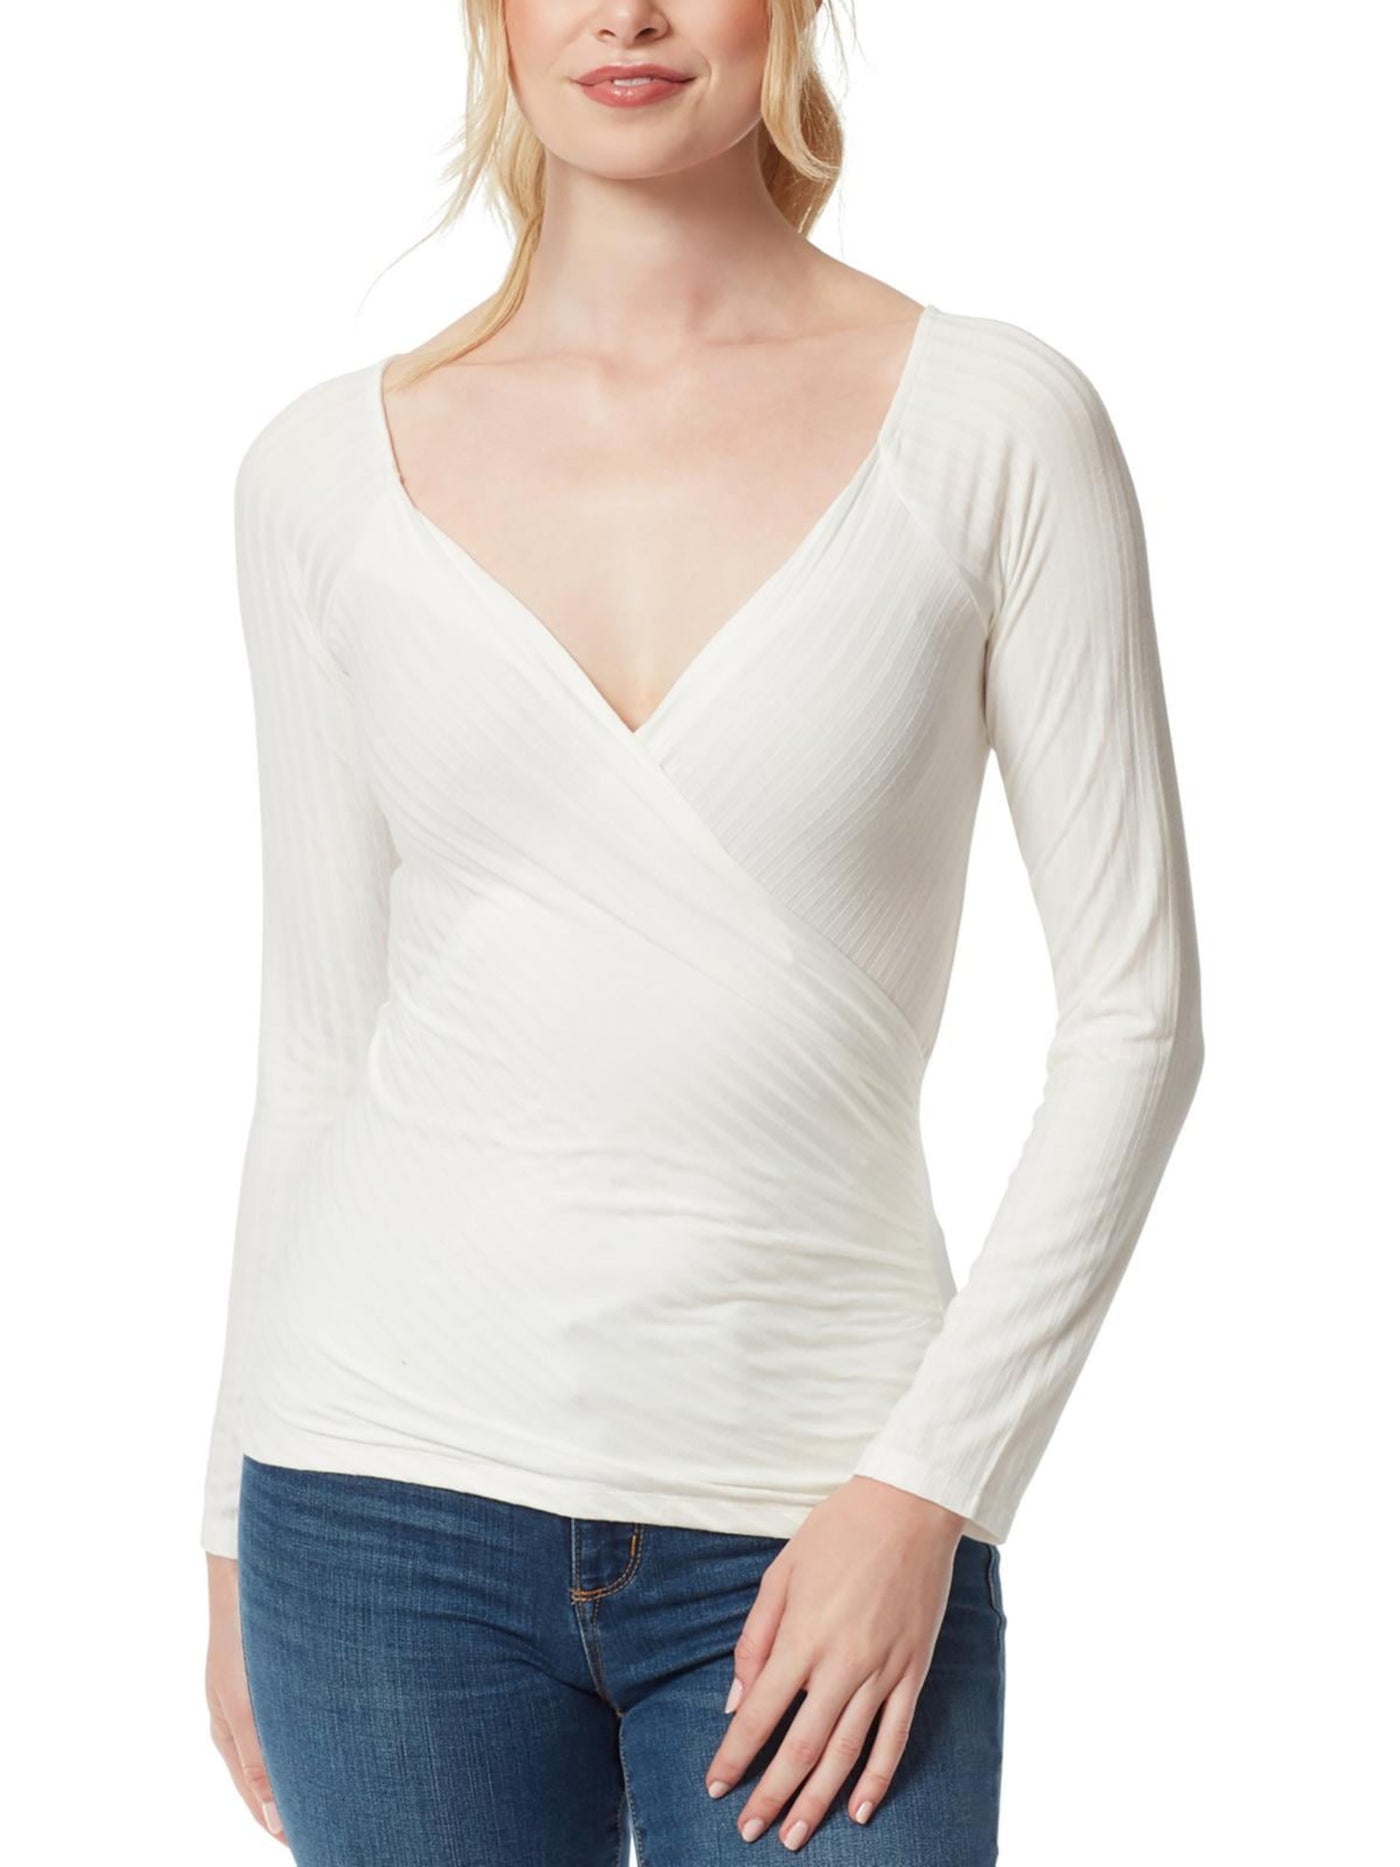 JESSICA SIMPSON Womens Ivory Ruched Pullover Long Sleeve Surplice Neckline Faux Wrap Top XS